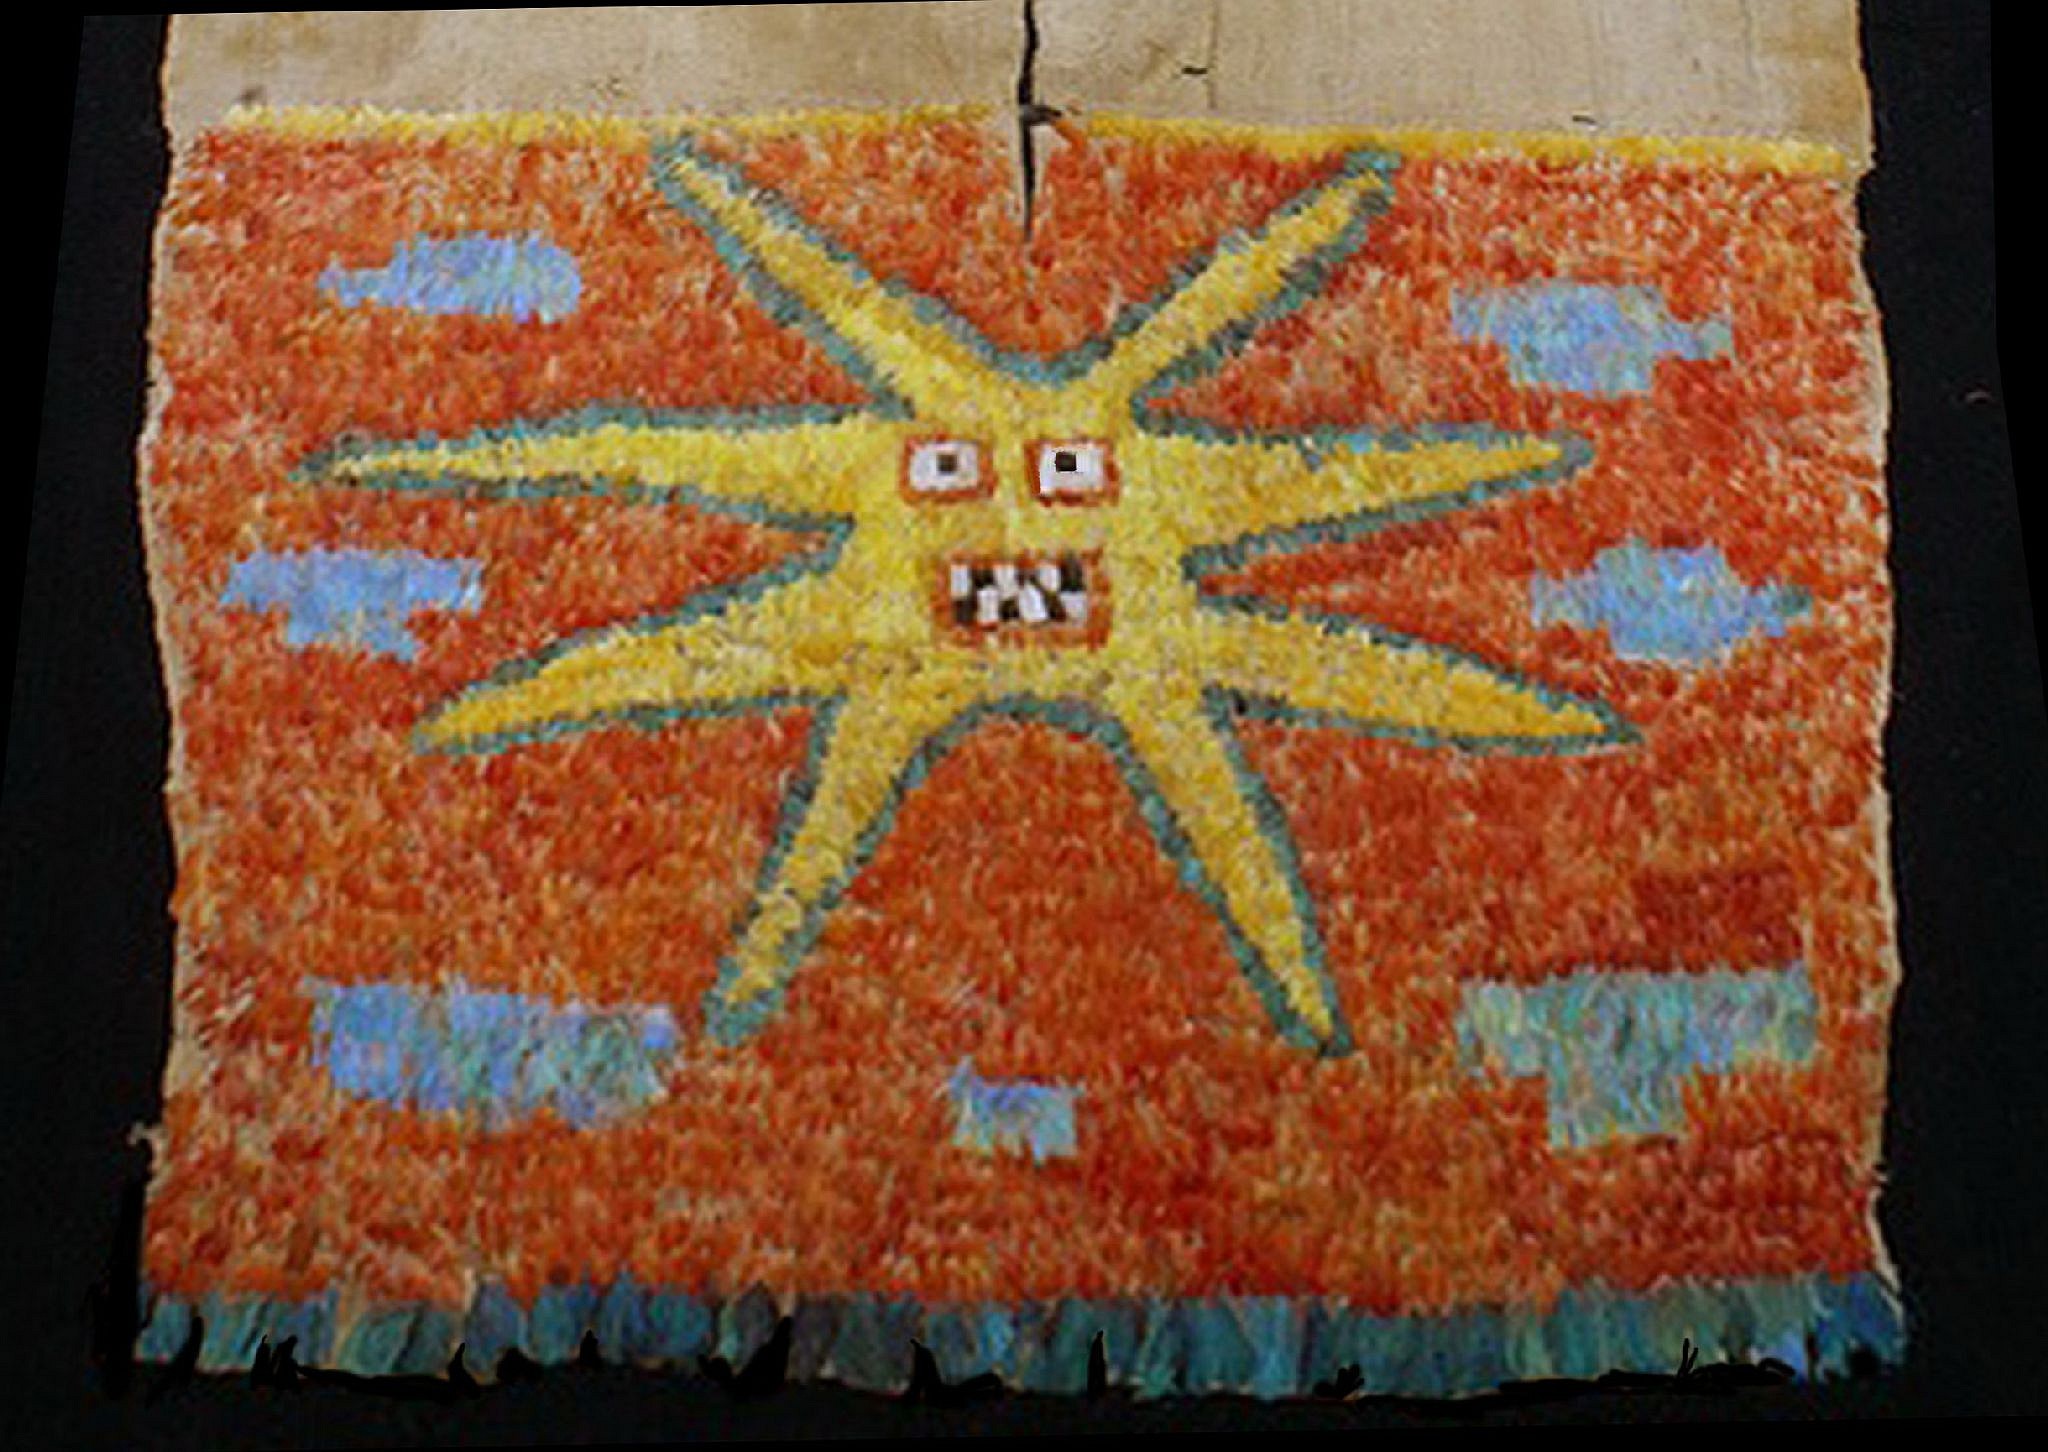 Peru, Early Nazca/Sihuas Feather Tunic With the Eight Pointed Star On an Orange Ground
This tunic with an eight-pointed star motif, also referred to as the Radiant Sun, is similar to other published tunics.  The front part is a complete star with assorted color blocks of blue feathers.  The back of the tunic has only two blue stripes on an orange ground with a fringe of turquoise macaw tail feathers.  The blue feathers do not contain blue pigment, but instead are natural prisms which brightly reflect the color of the sky.  I believe that all the feathers are from the Scarlet, Yellow, and Blue Macaws.  Tunics with similar motifs are illustrated in TEXTILE ART OF PERU, 1989, L.L. Editores, Lima. pages145,-147 & 163.  Usually tunics with an eight-pointed star motif are from the Nazca region, from the South coast of Peru.   This tunic was found in the Sihuas region near the city of Arequipa and predates the Nazca by 500 years.  The backing fabric is fragile and needs proper conservation.
Media: Textile
Dimensions: Length 56"  x Width 35"  (142cm X 88.9cm)
&bull;SOLD
N1028